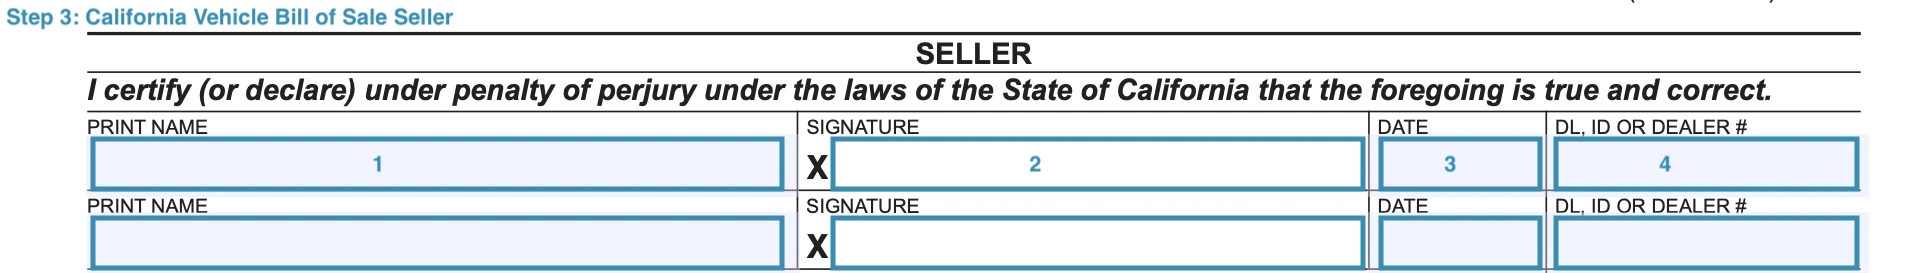 Part for the seller's certification of California motor vehicle bill of sale